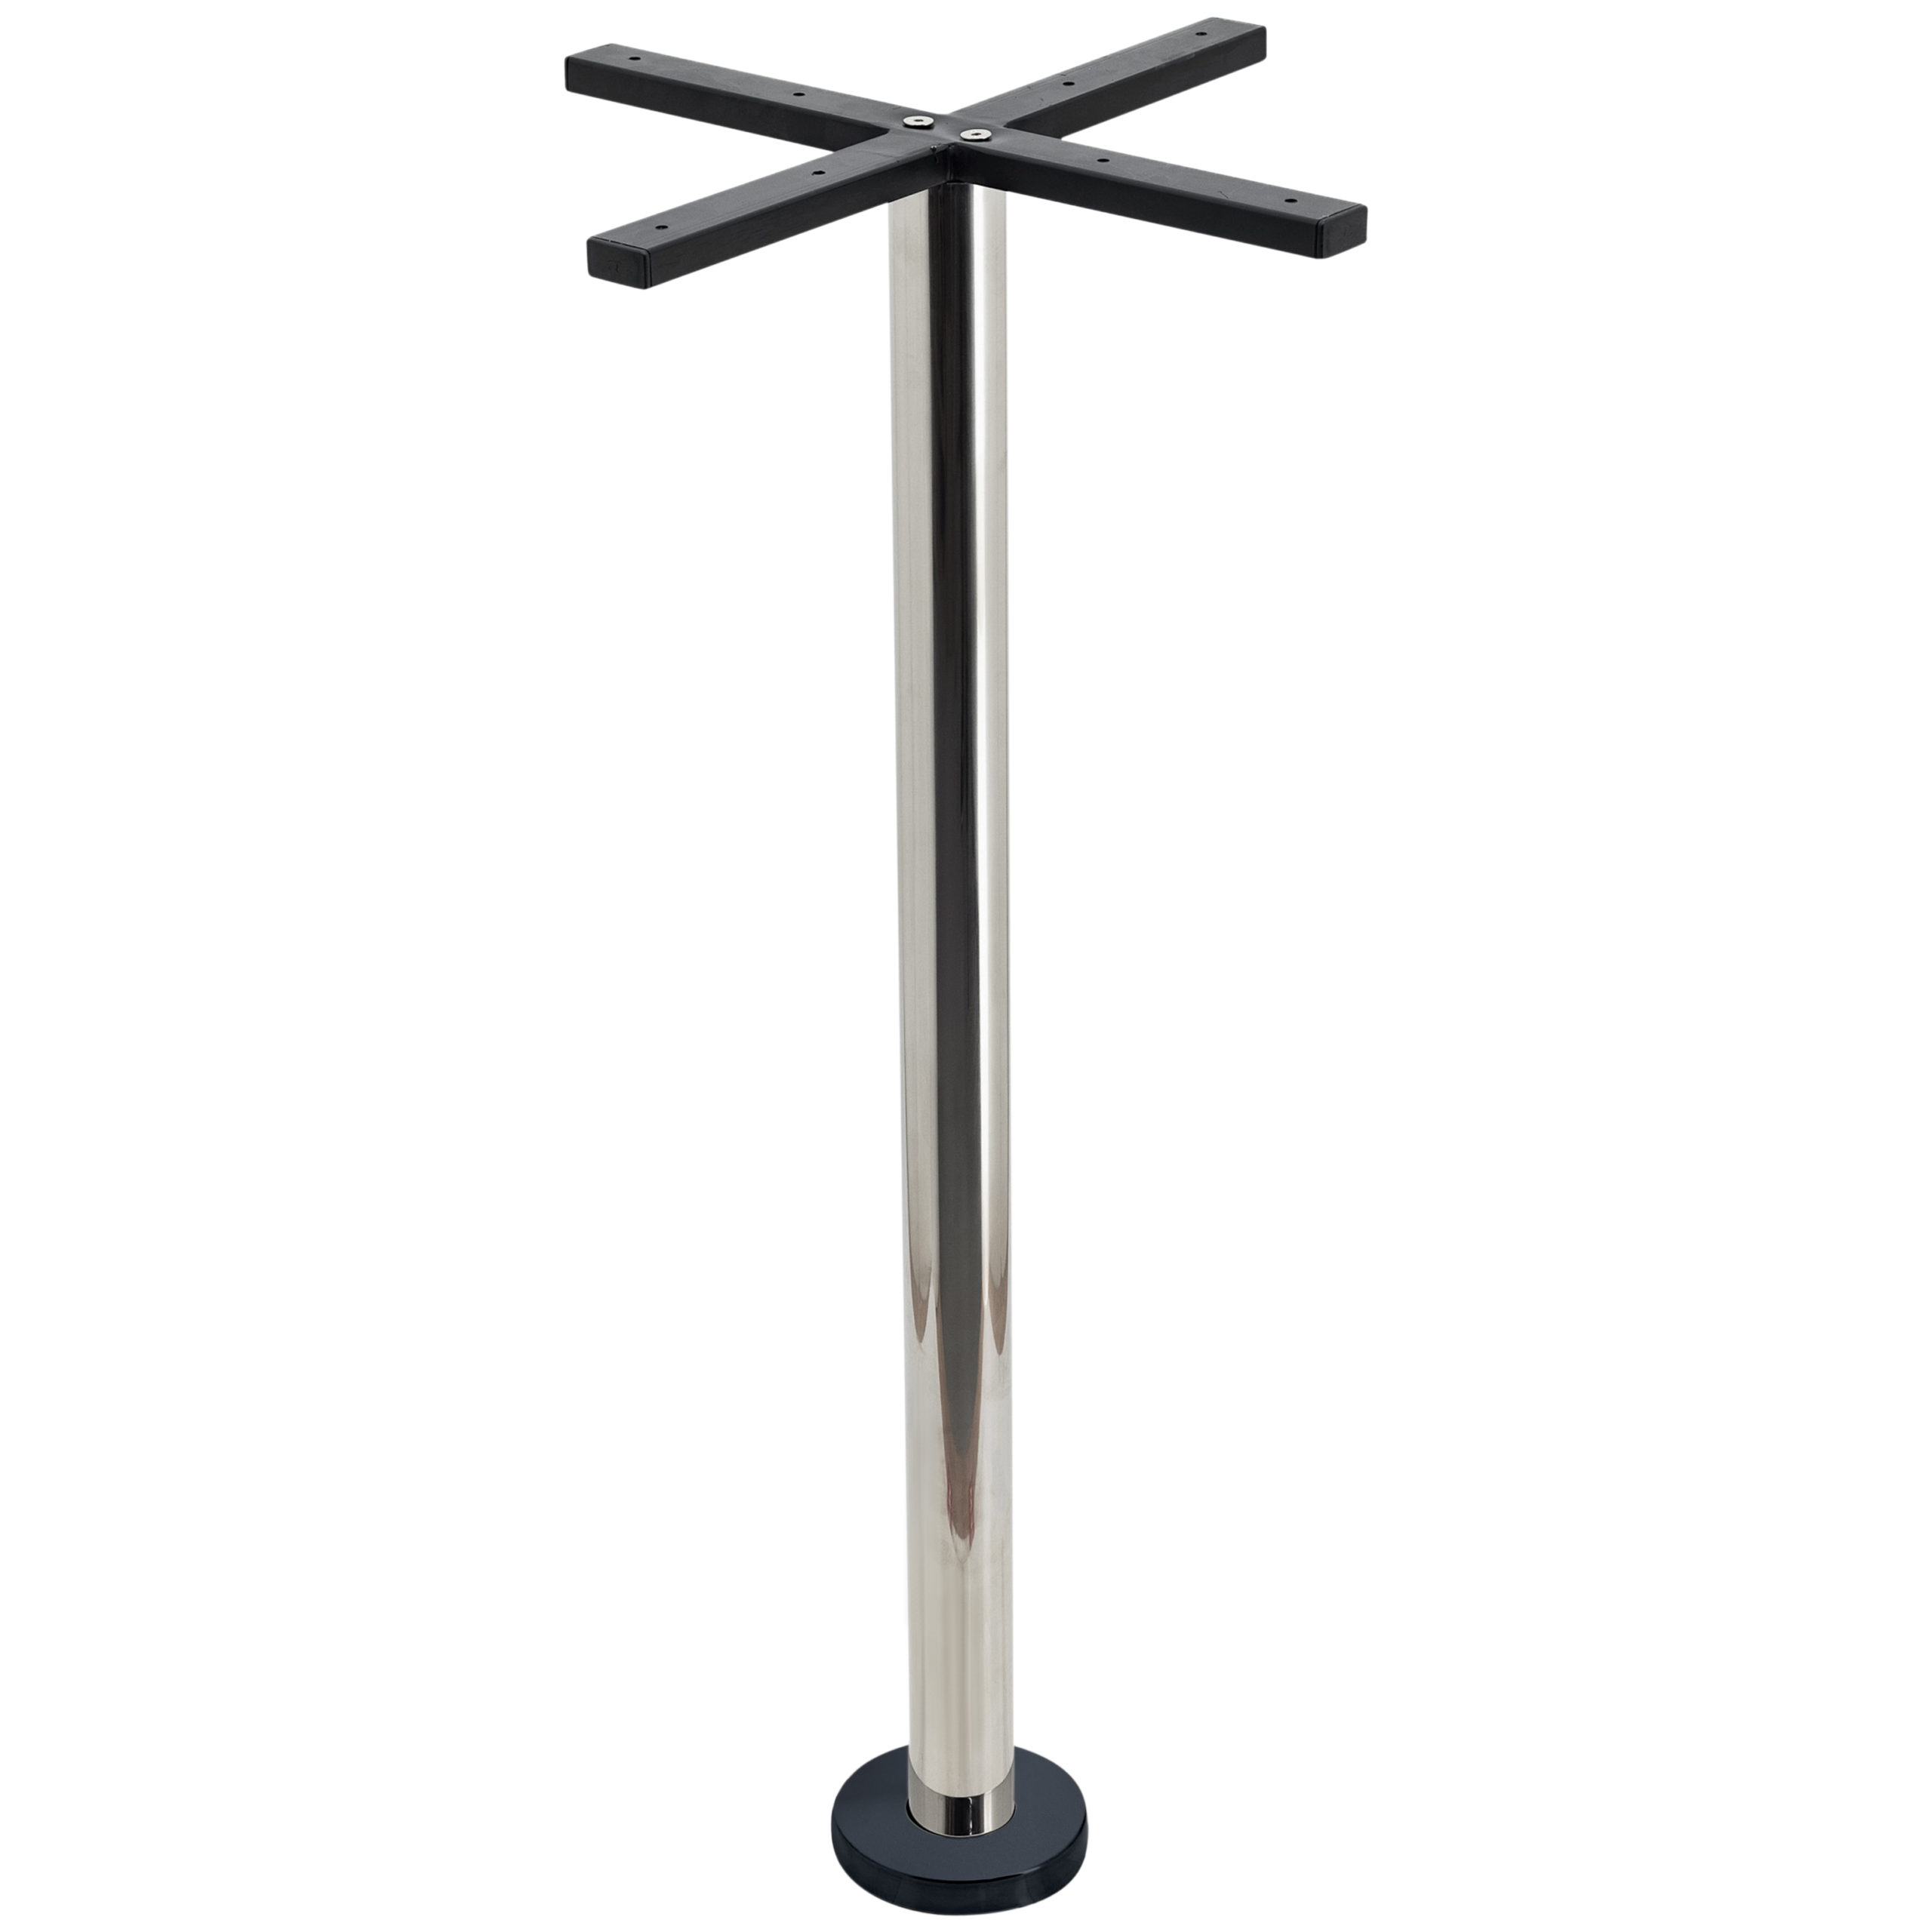 Bolt-In Stainless Steel Bar Table with Round Pole